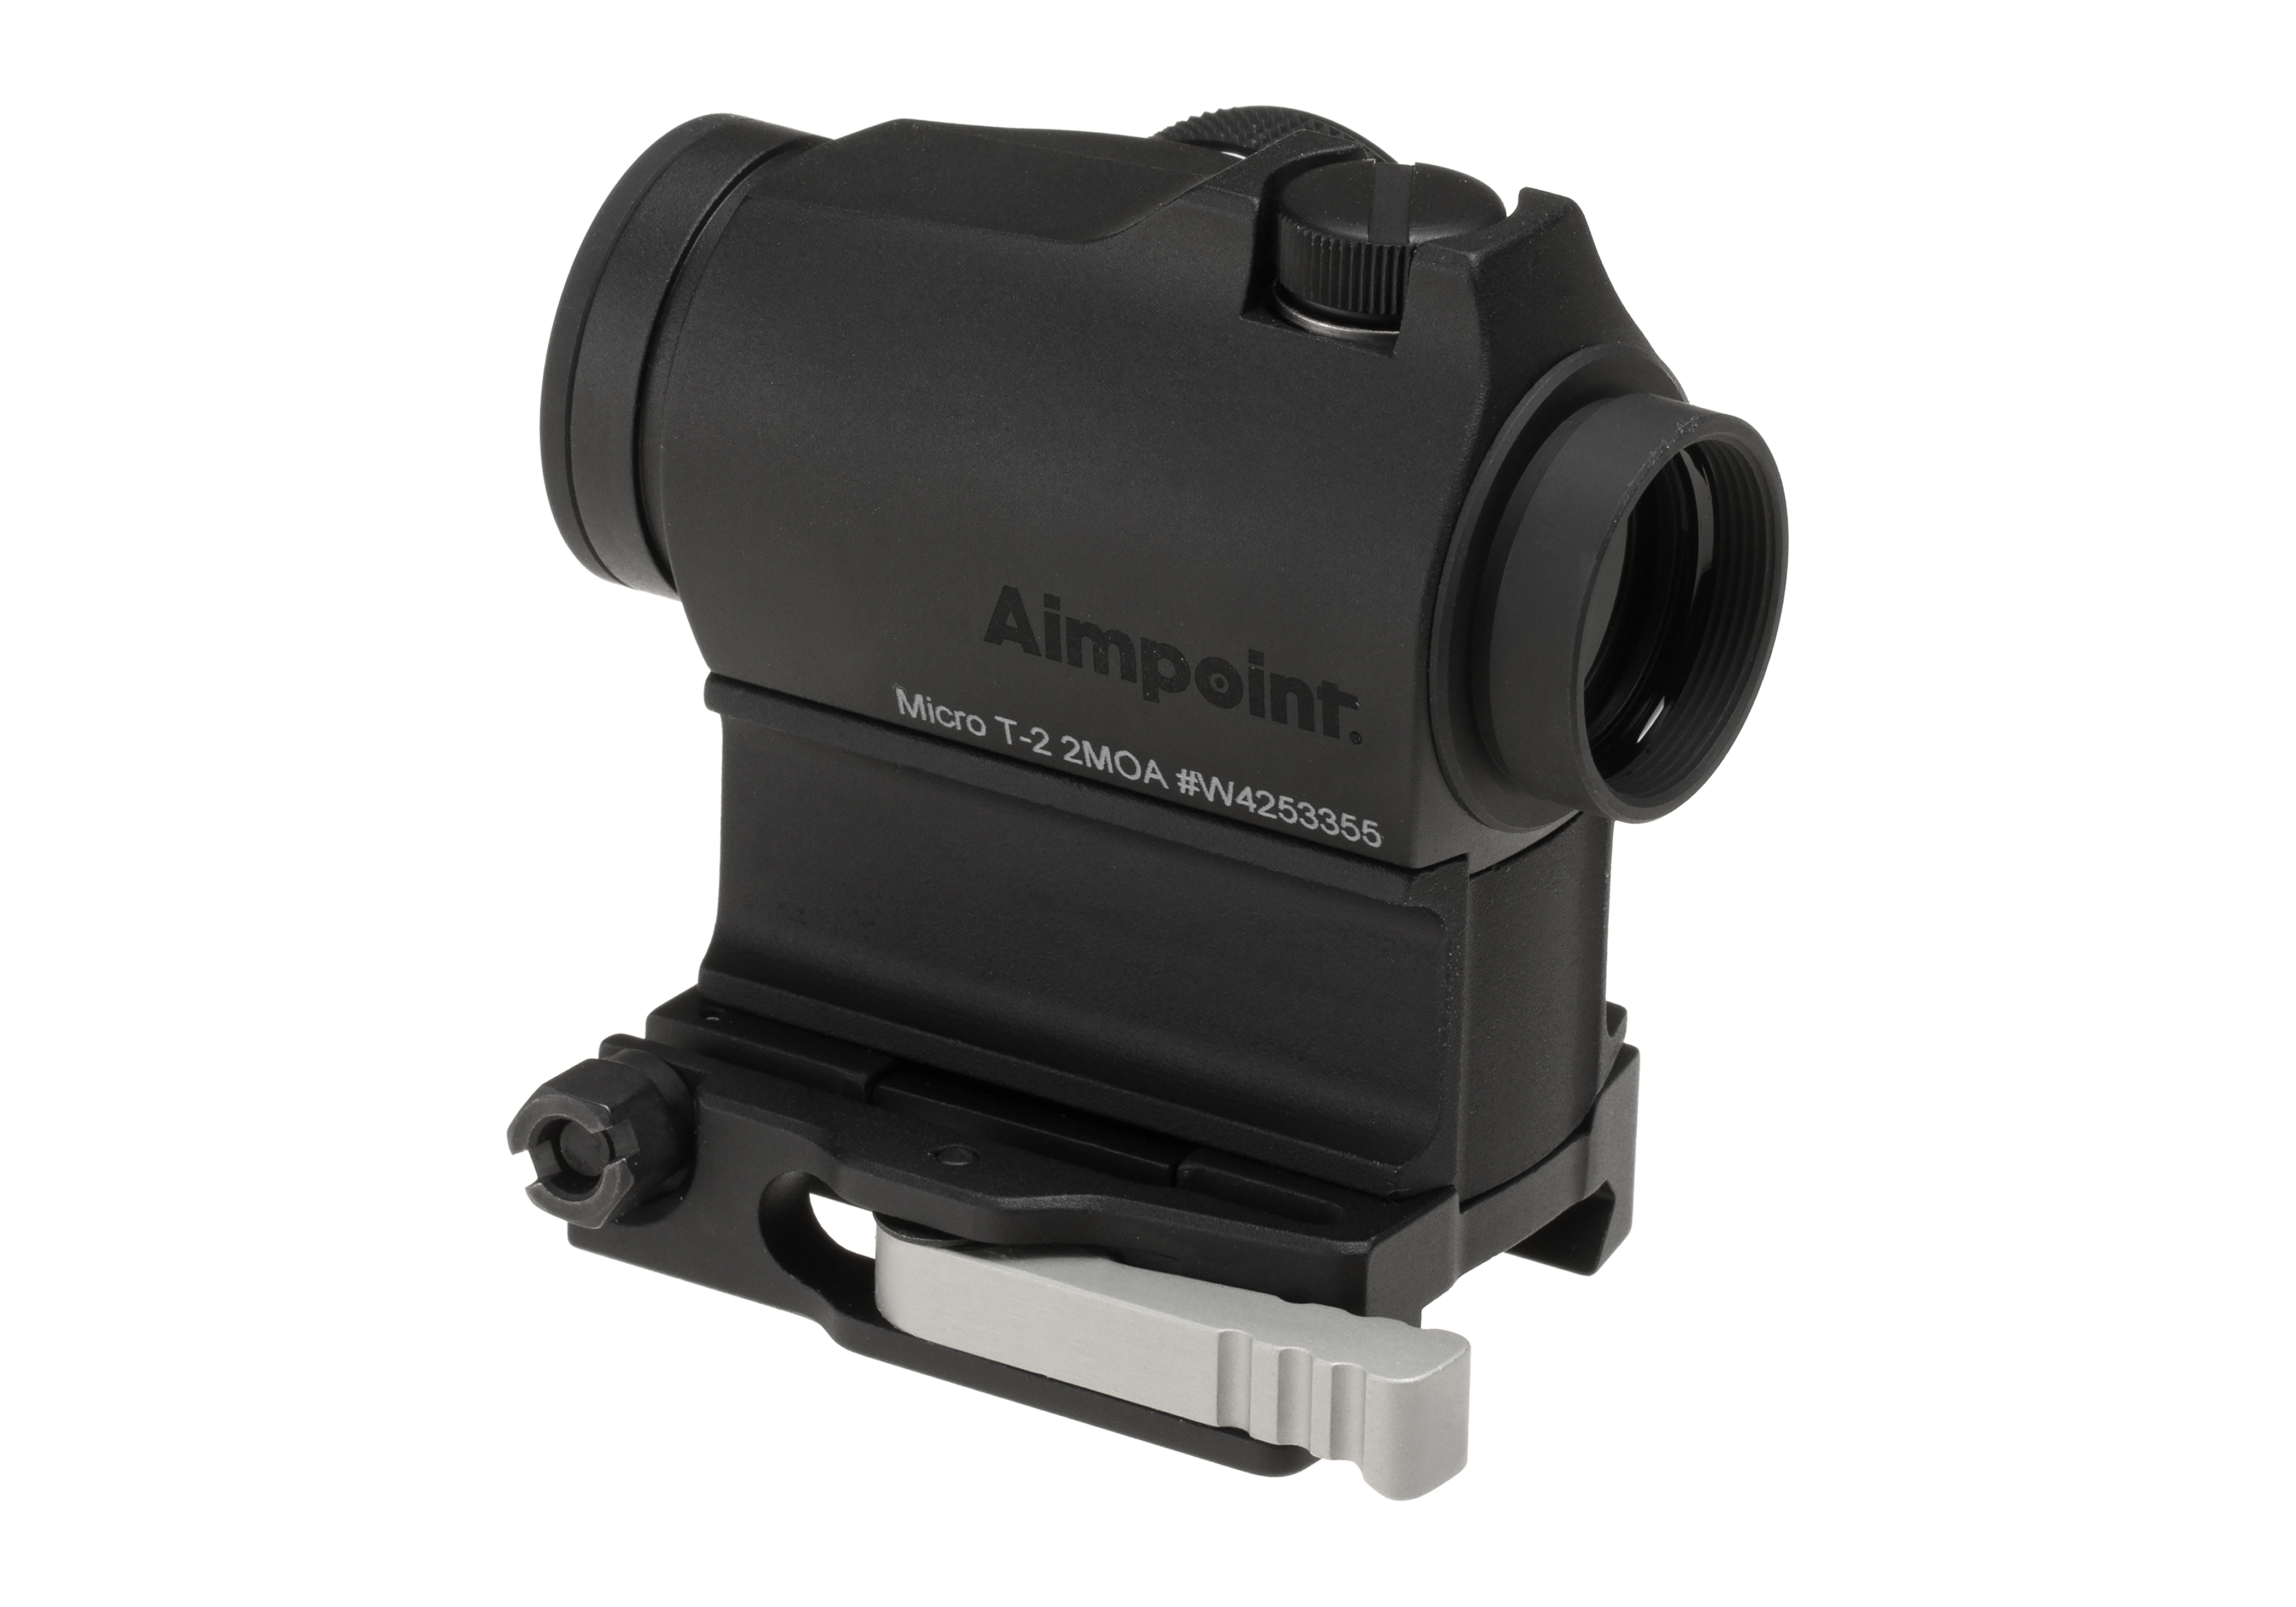 Aimpoint Micro T-2 Red Dot Sight 2 MOA Dot LRP Mount 39mm Spacer Matte